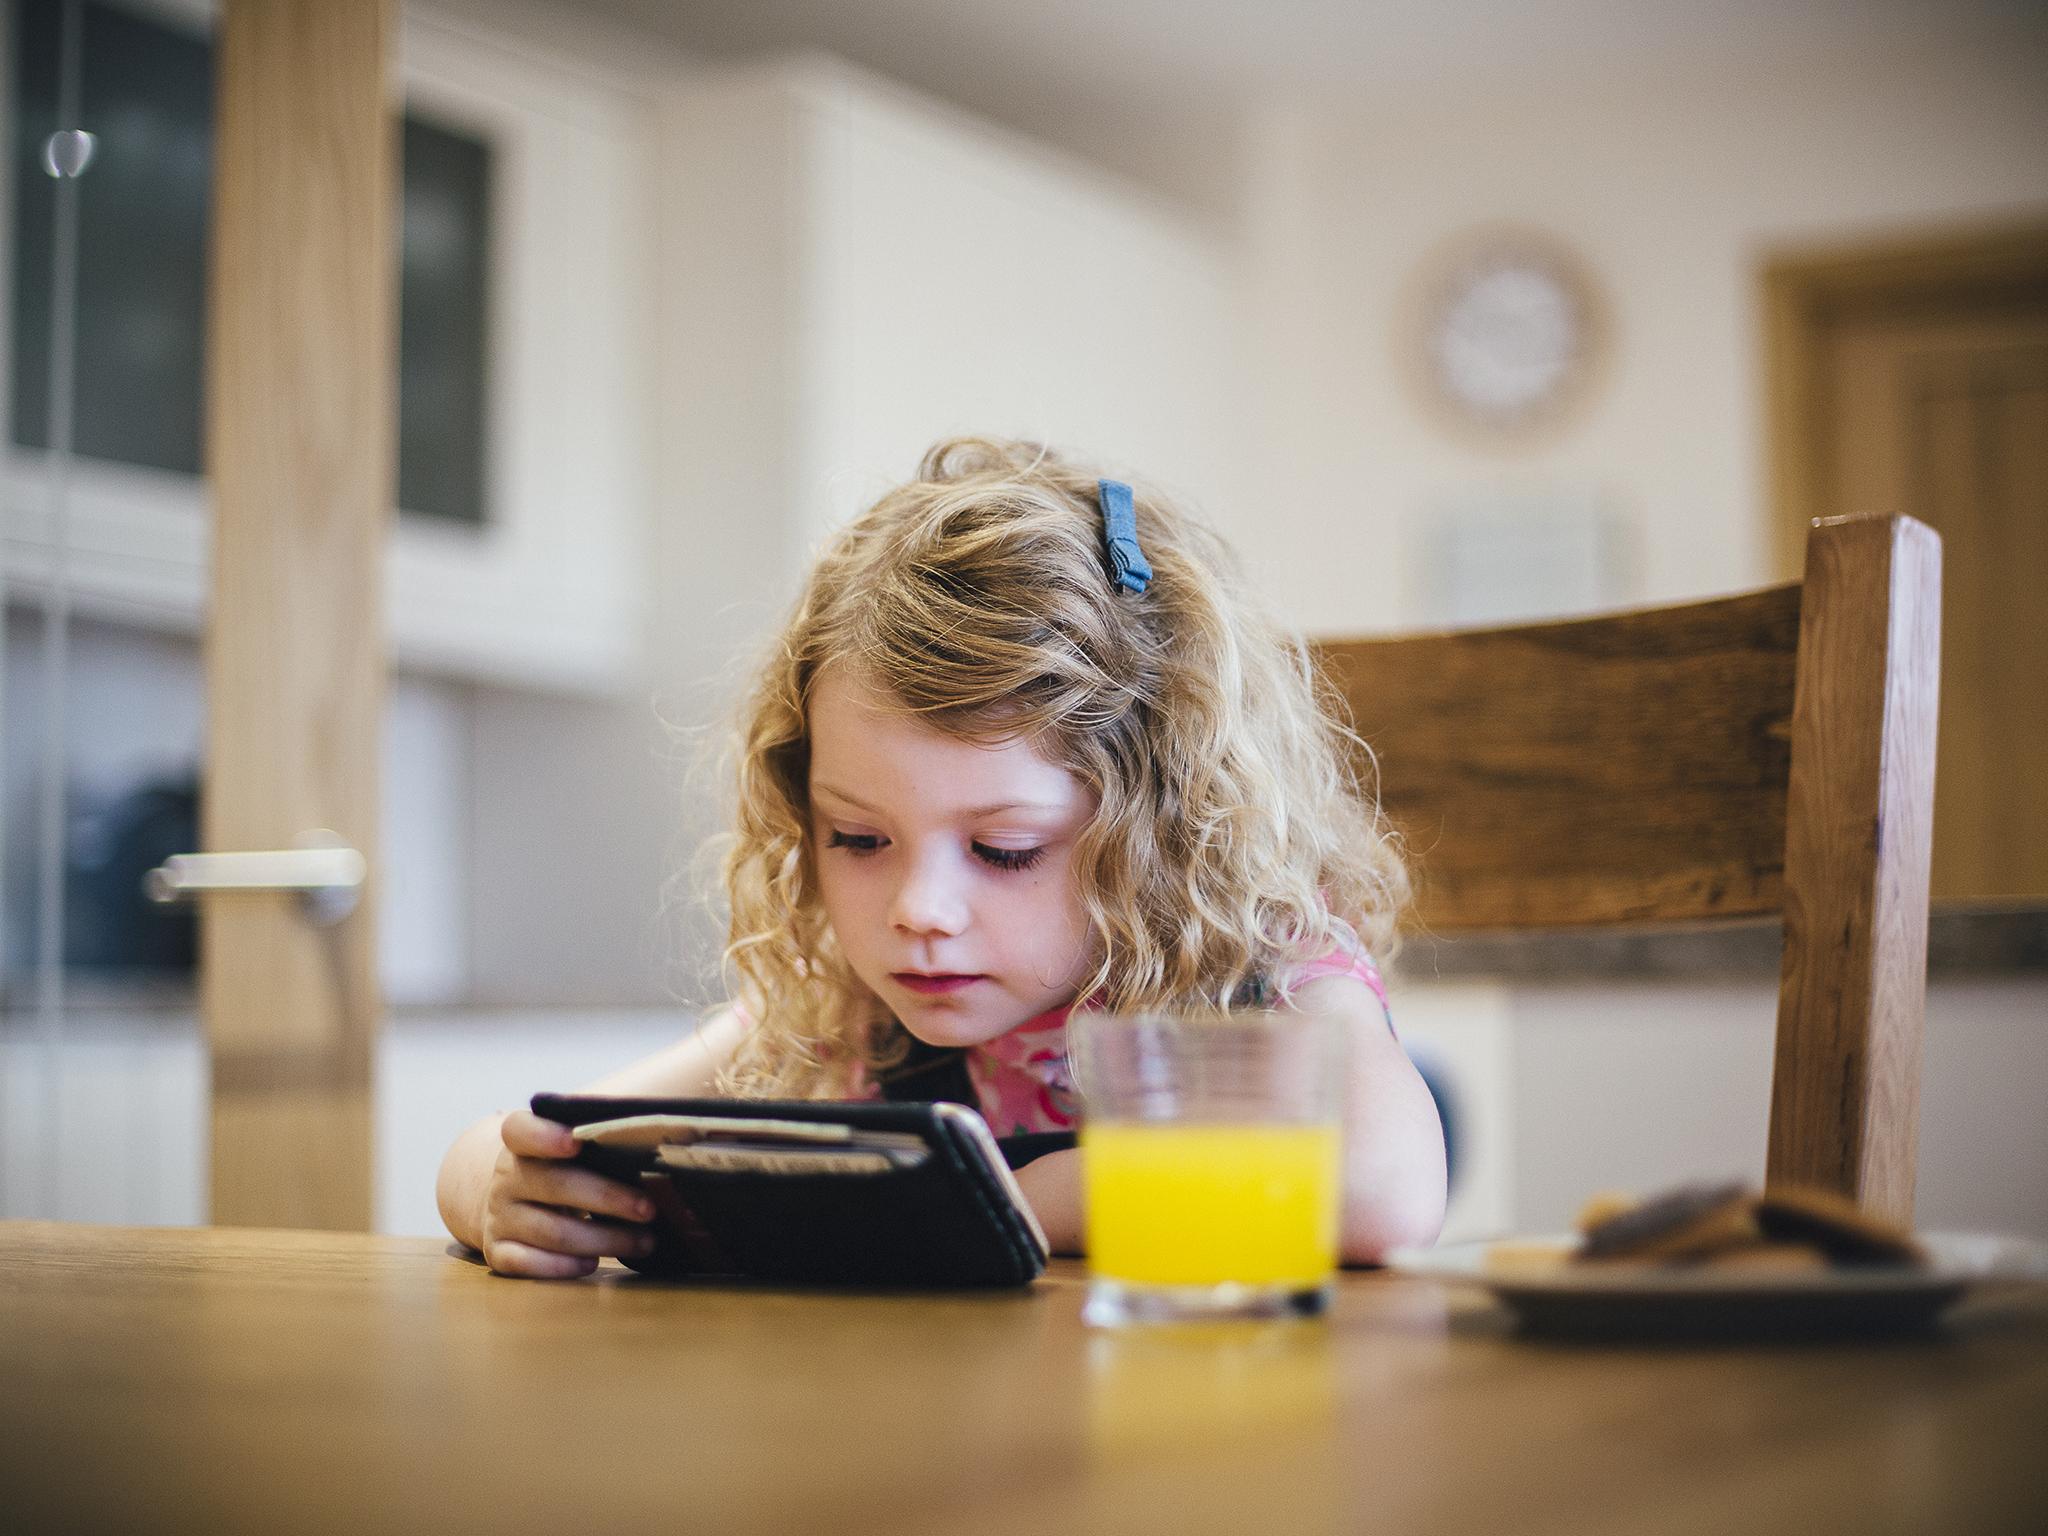 Some 84 per cent of children like to play using a smartphone, tablet or computer